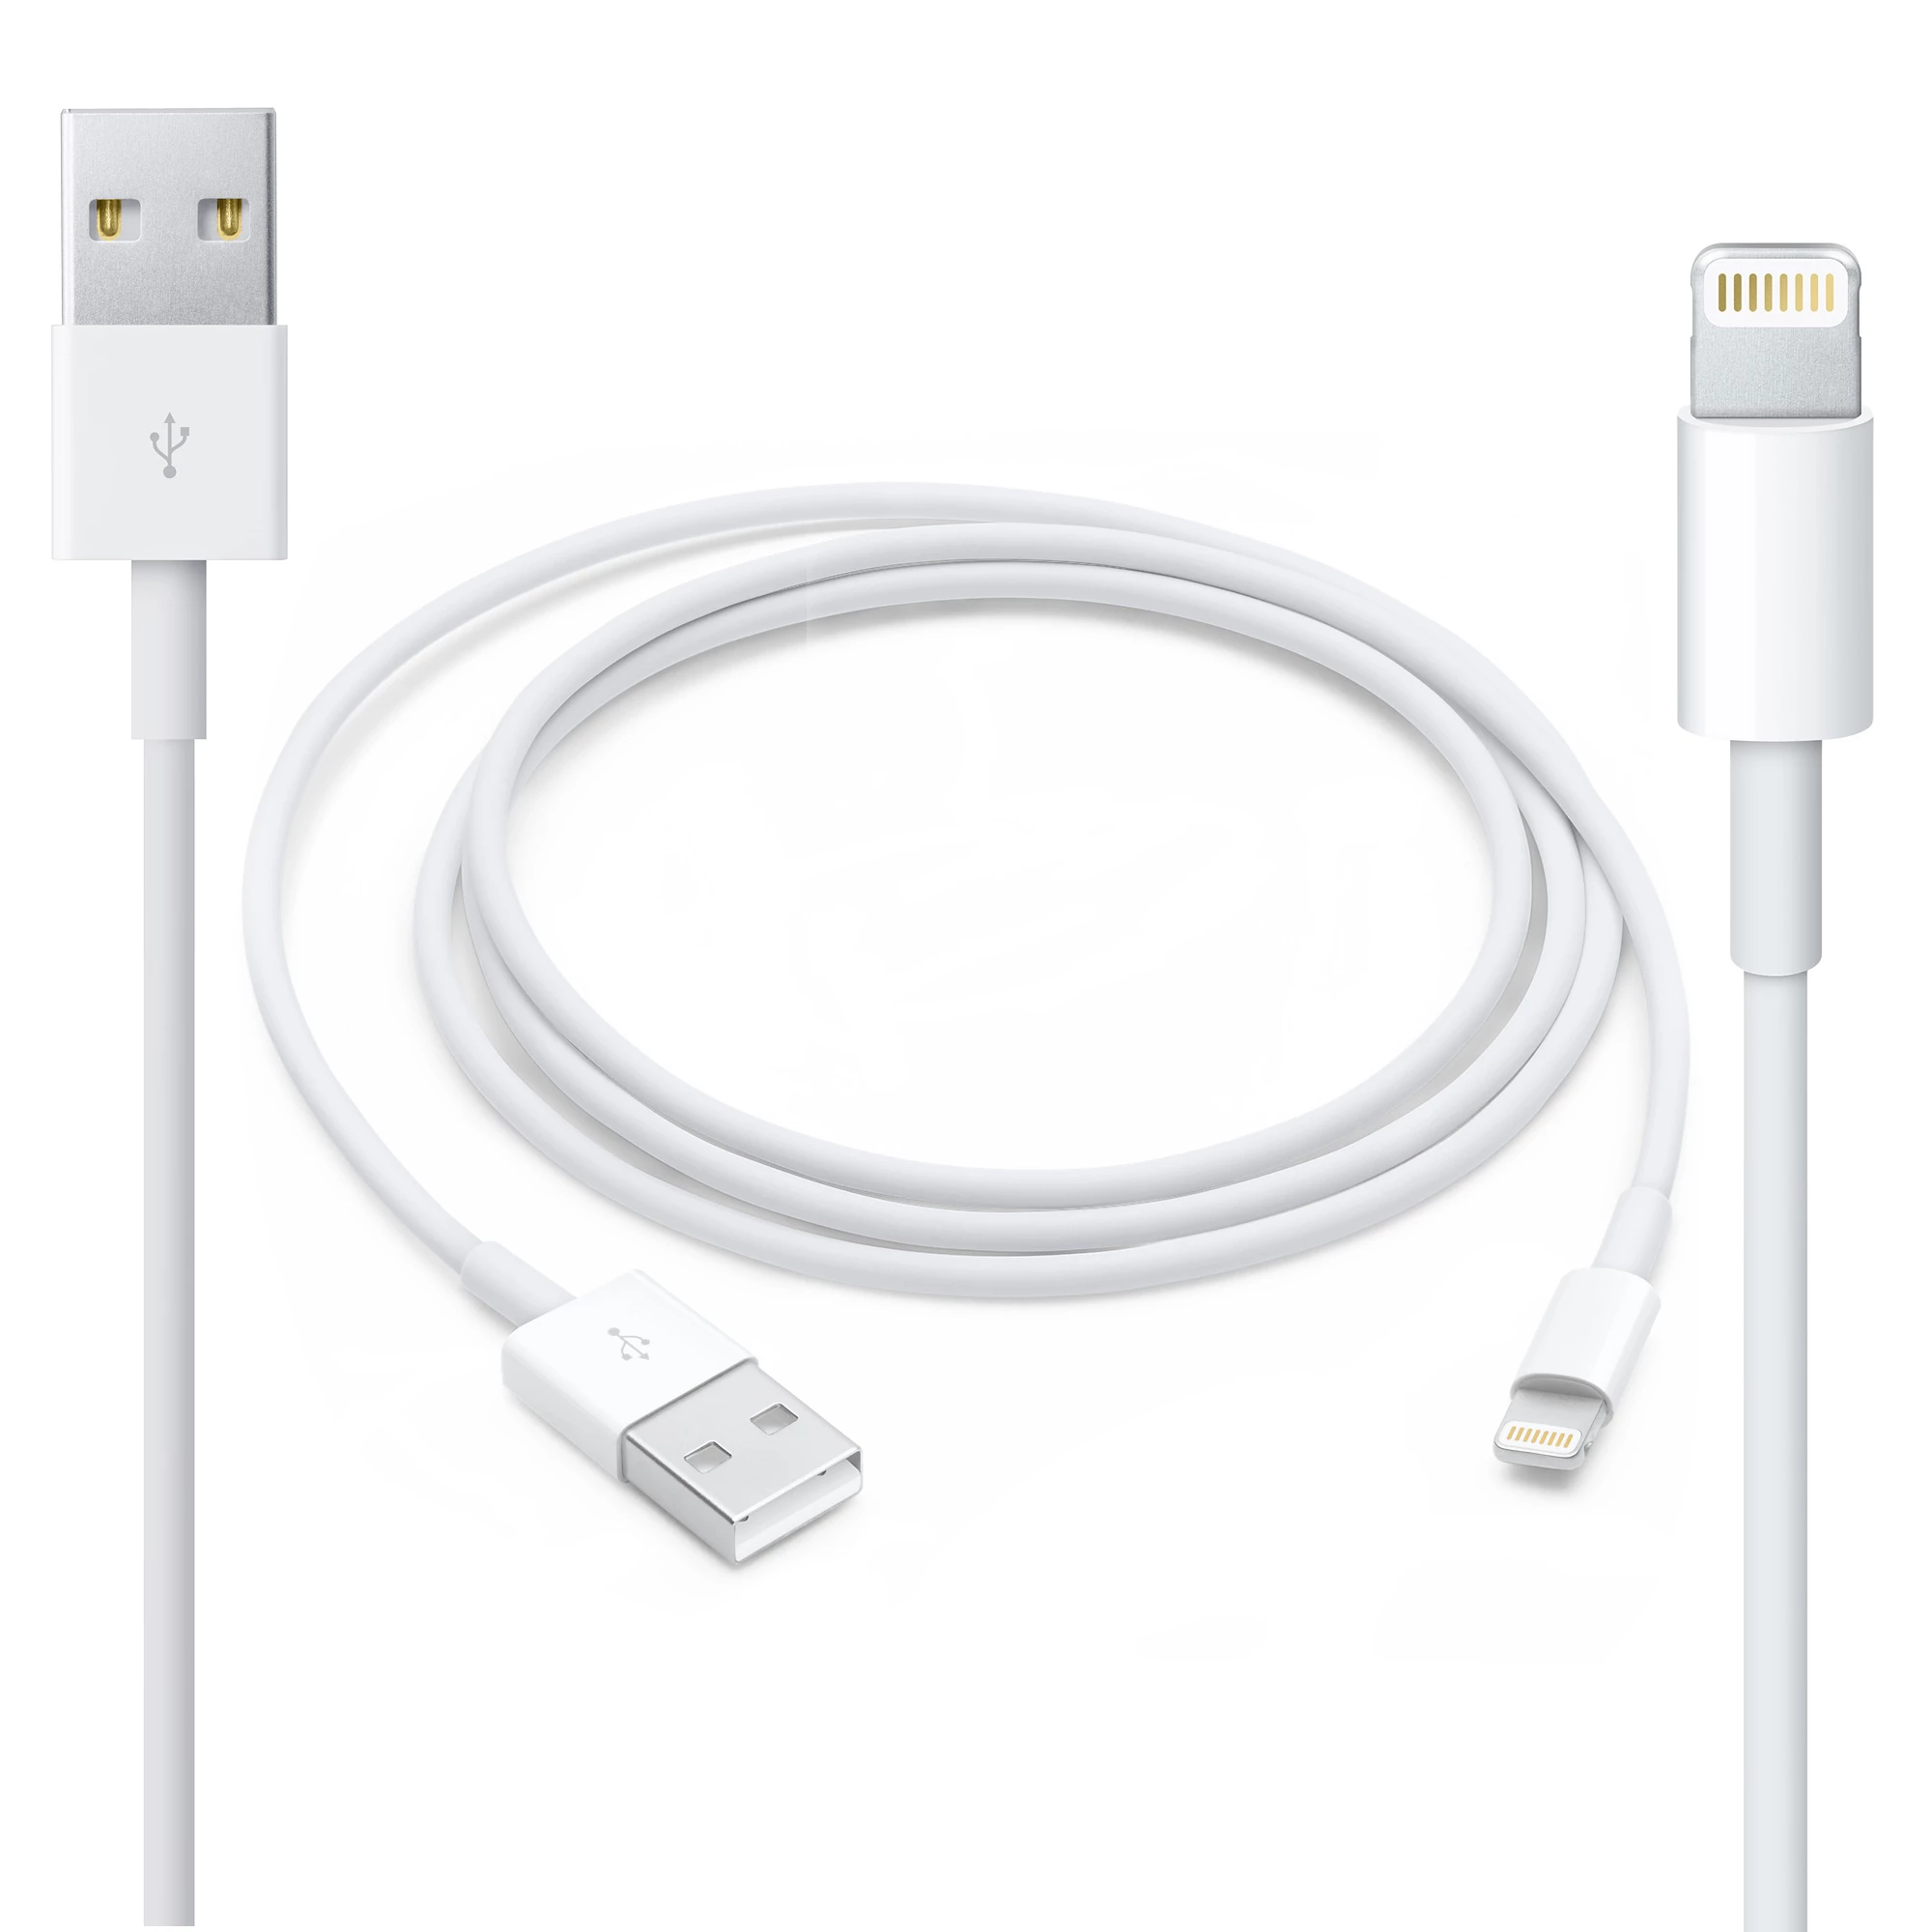 Apple Lightning to USB Cable (2 m) (MD819)